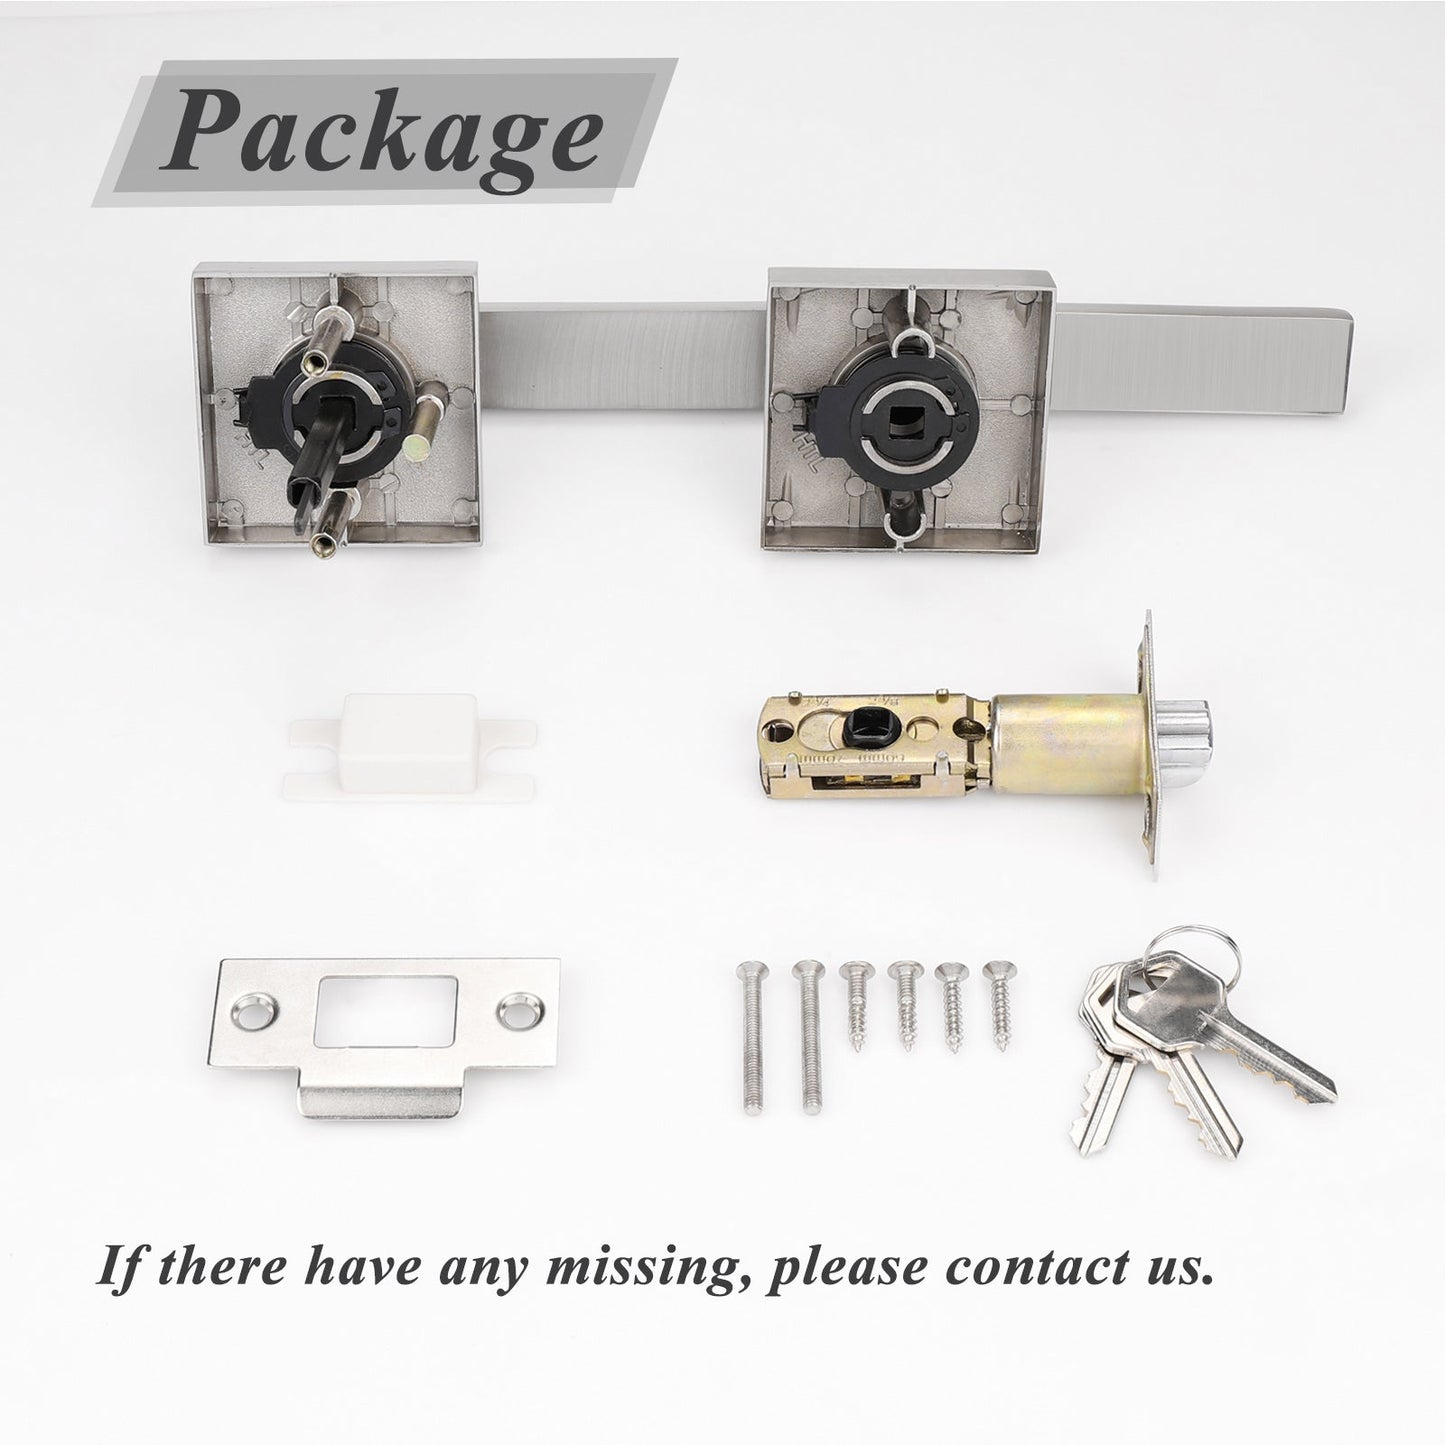 Heavy Duty Door Handles Brushed Nickel Finish, Entry Keyed Lock/ Privacy/Passage/Dummy Function, DL01SN - Probrico